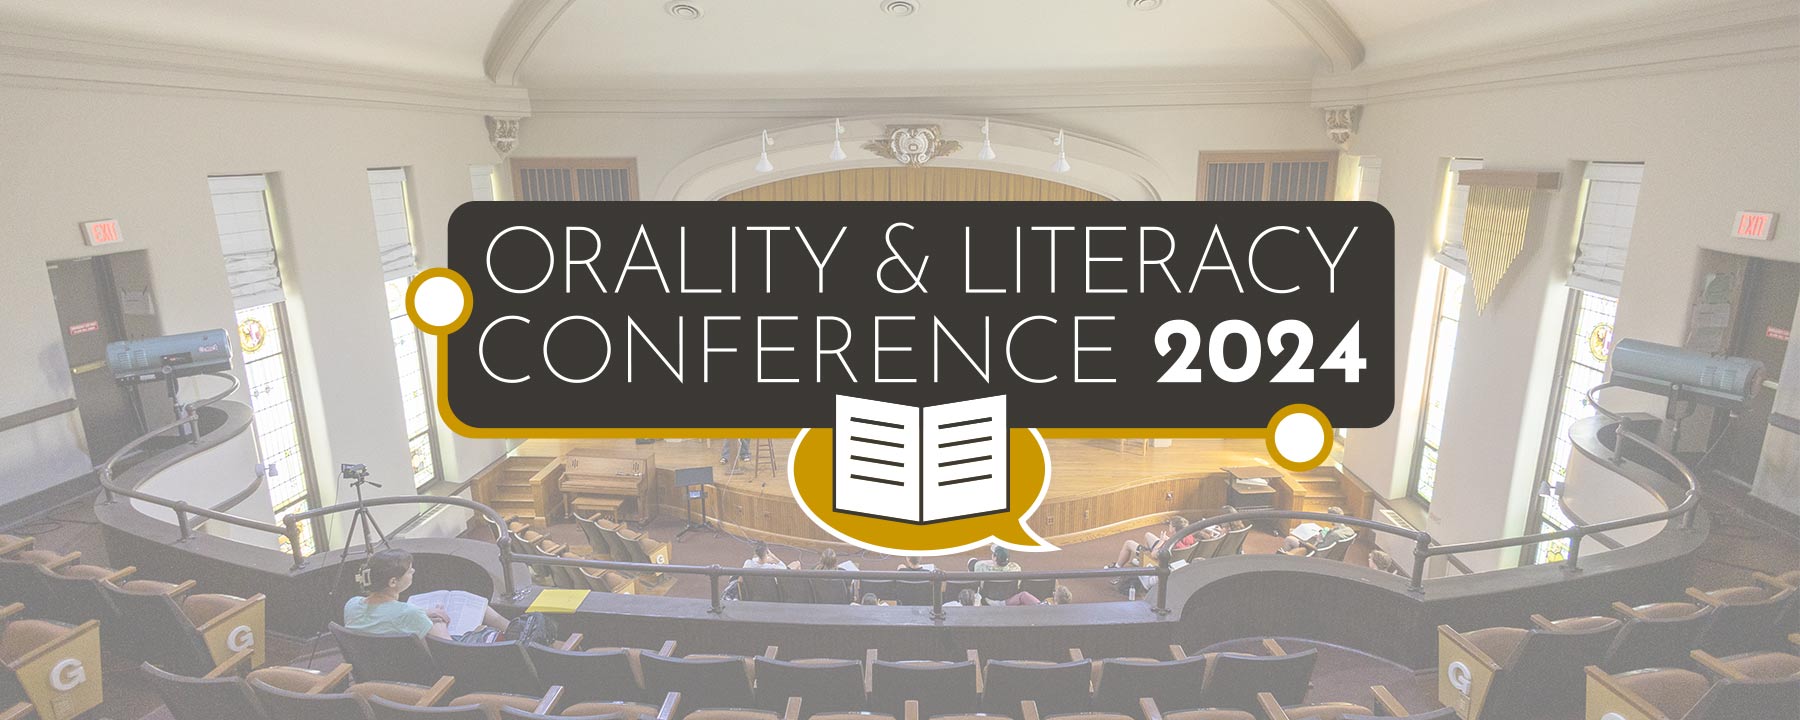 Image of Orality and Literacy Conference